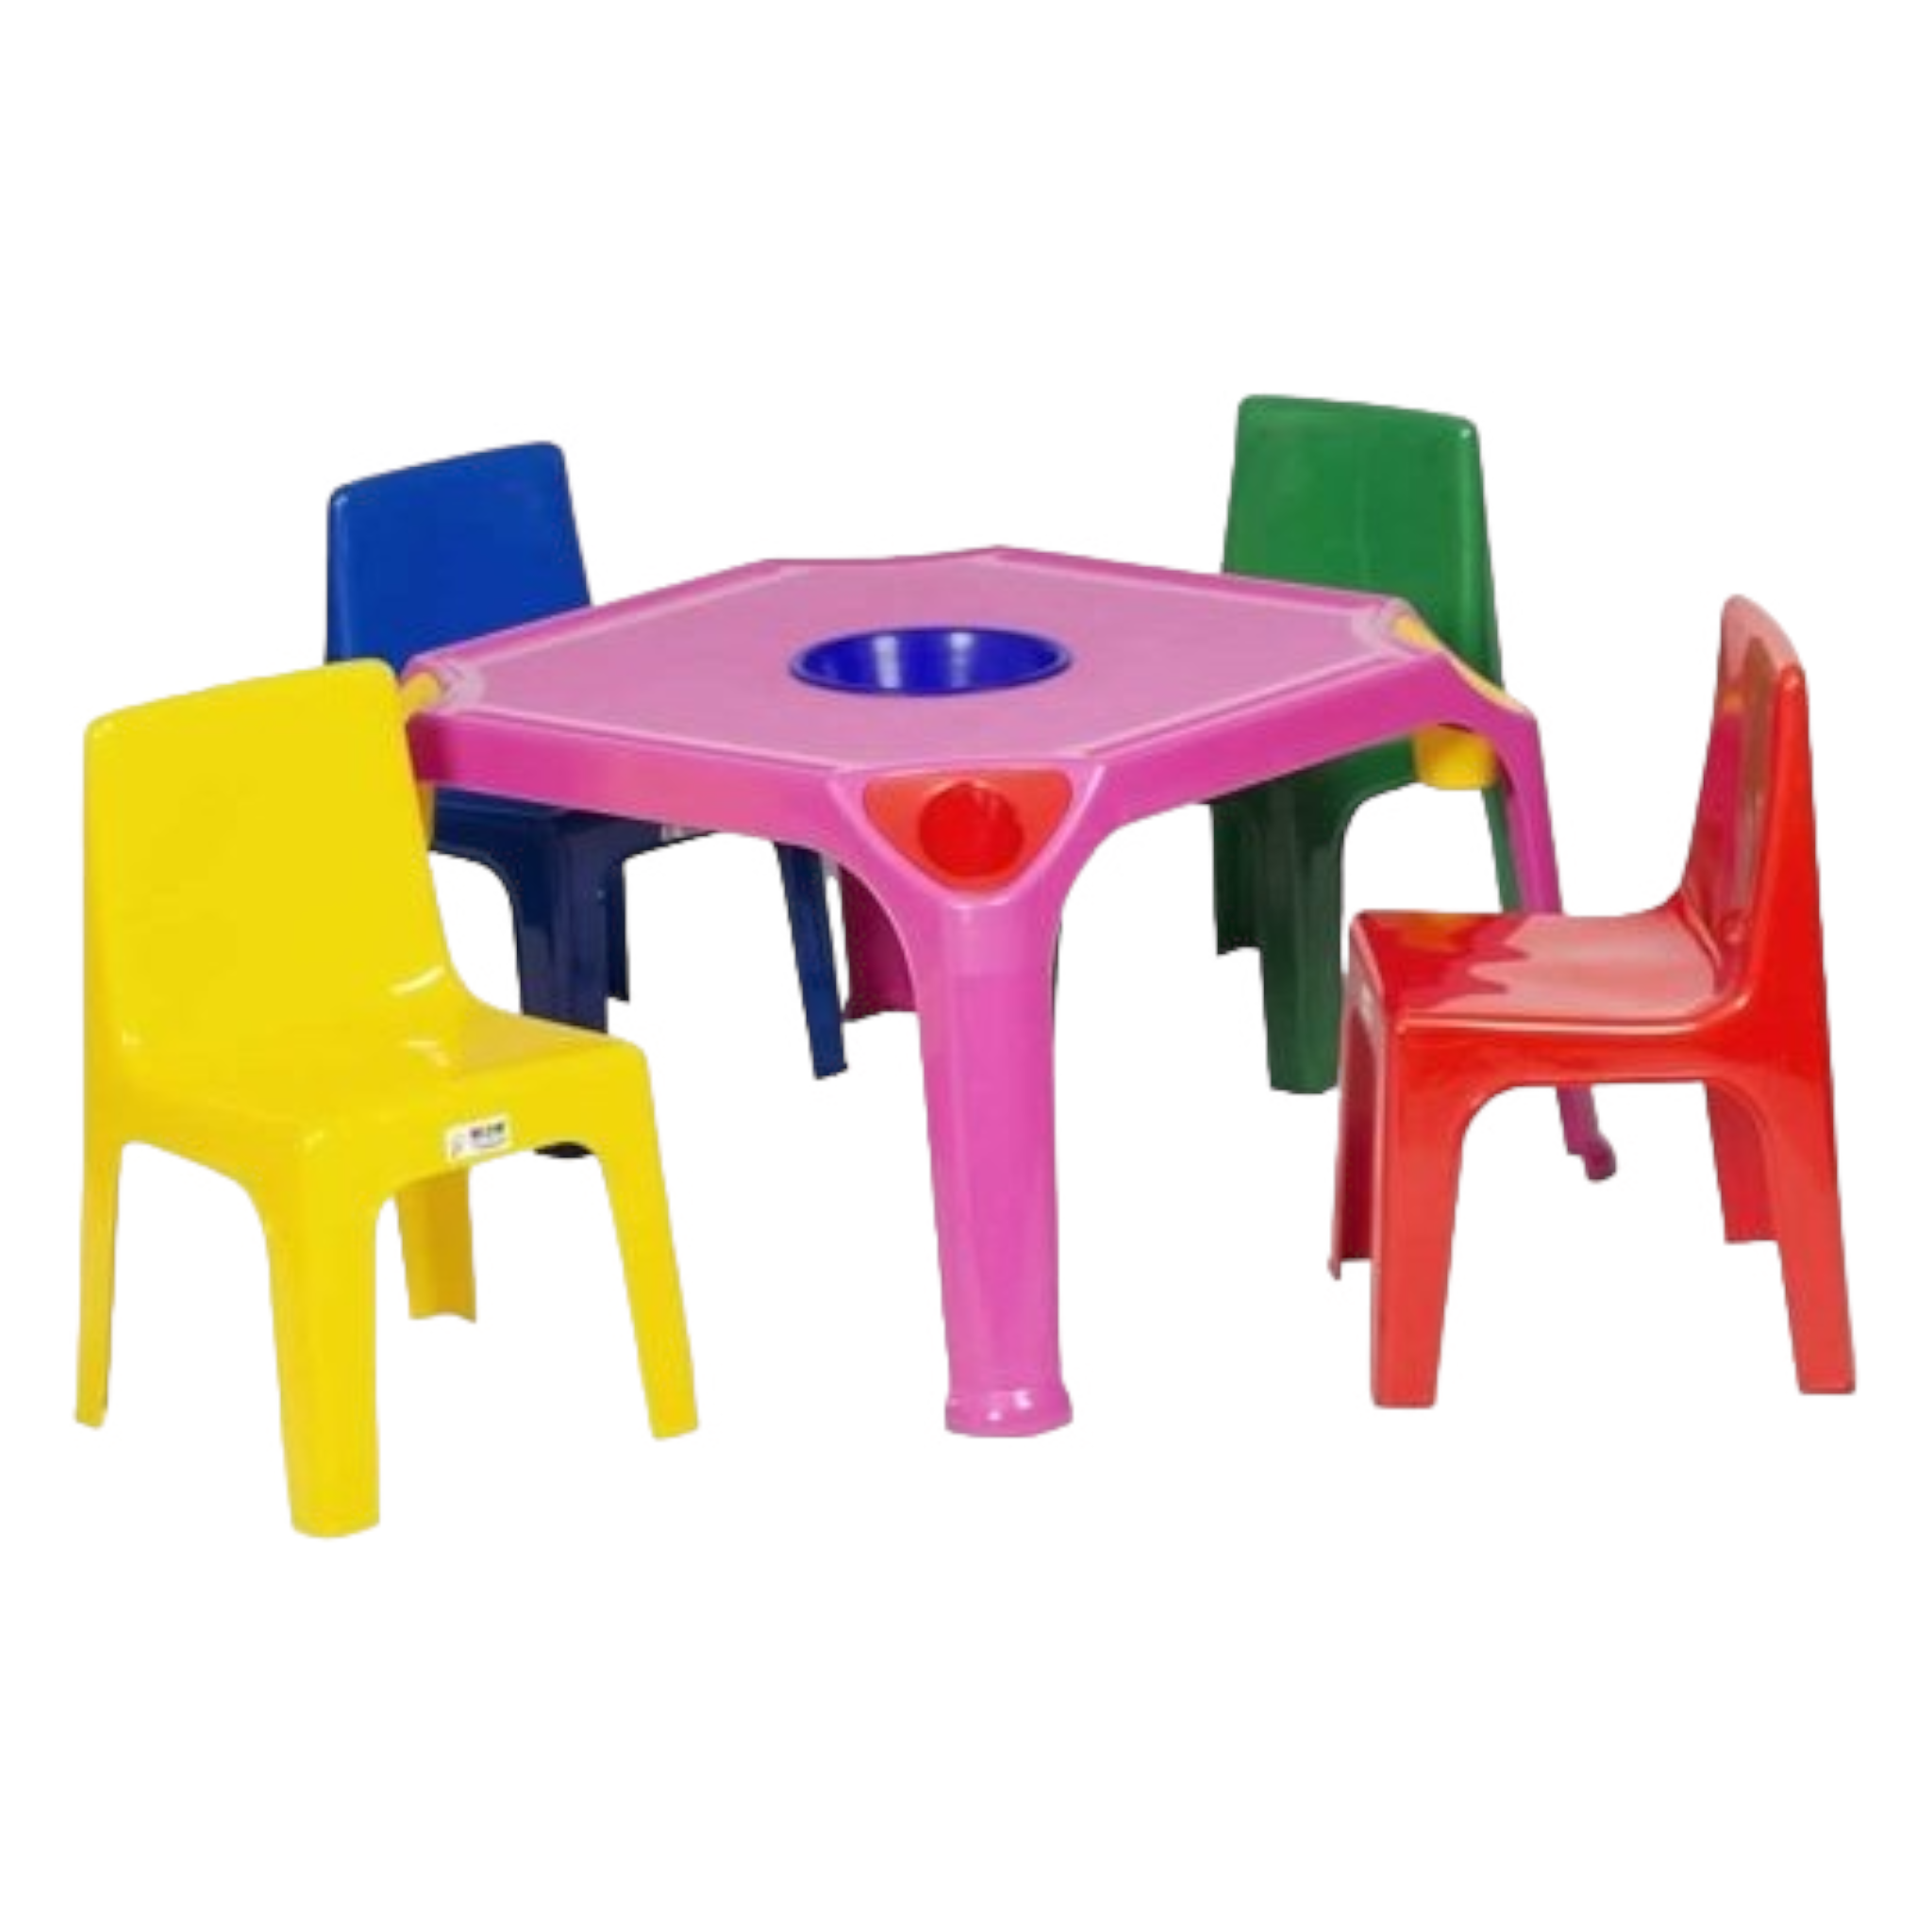 Kiddies Plastic Table With Hole Buzz Kids